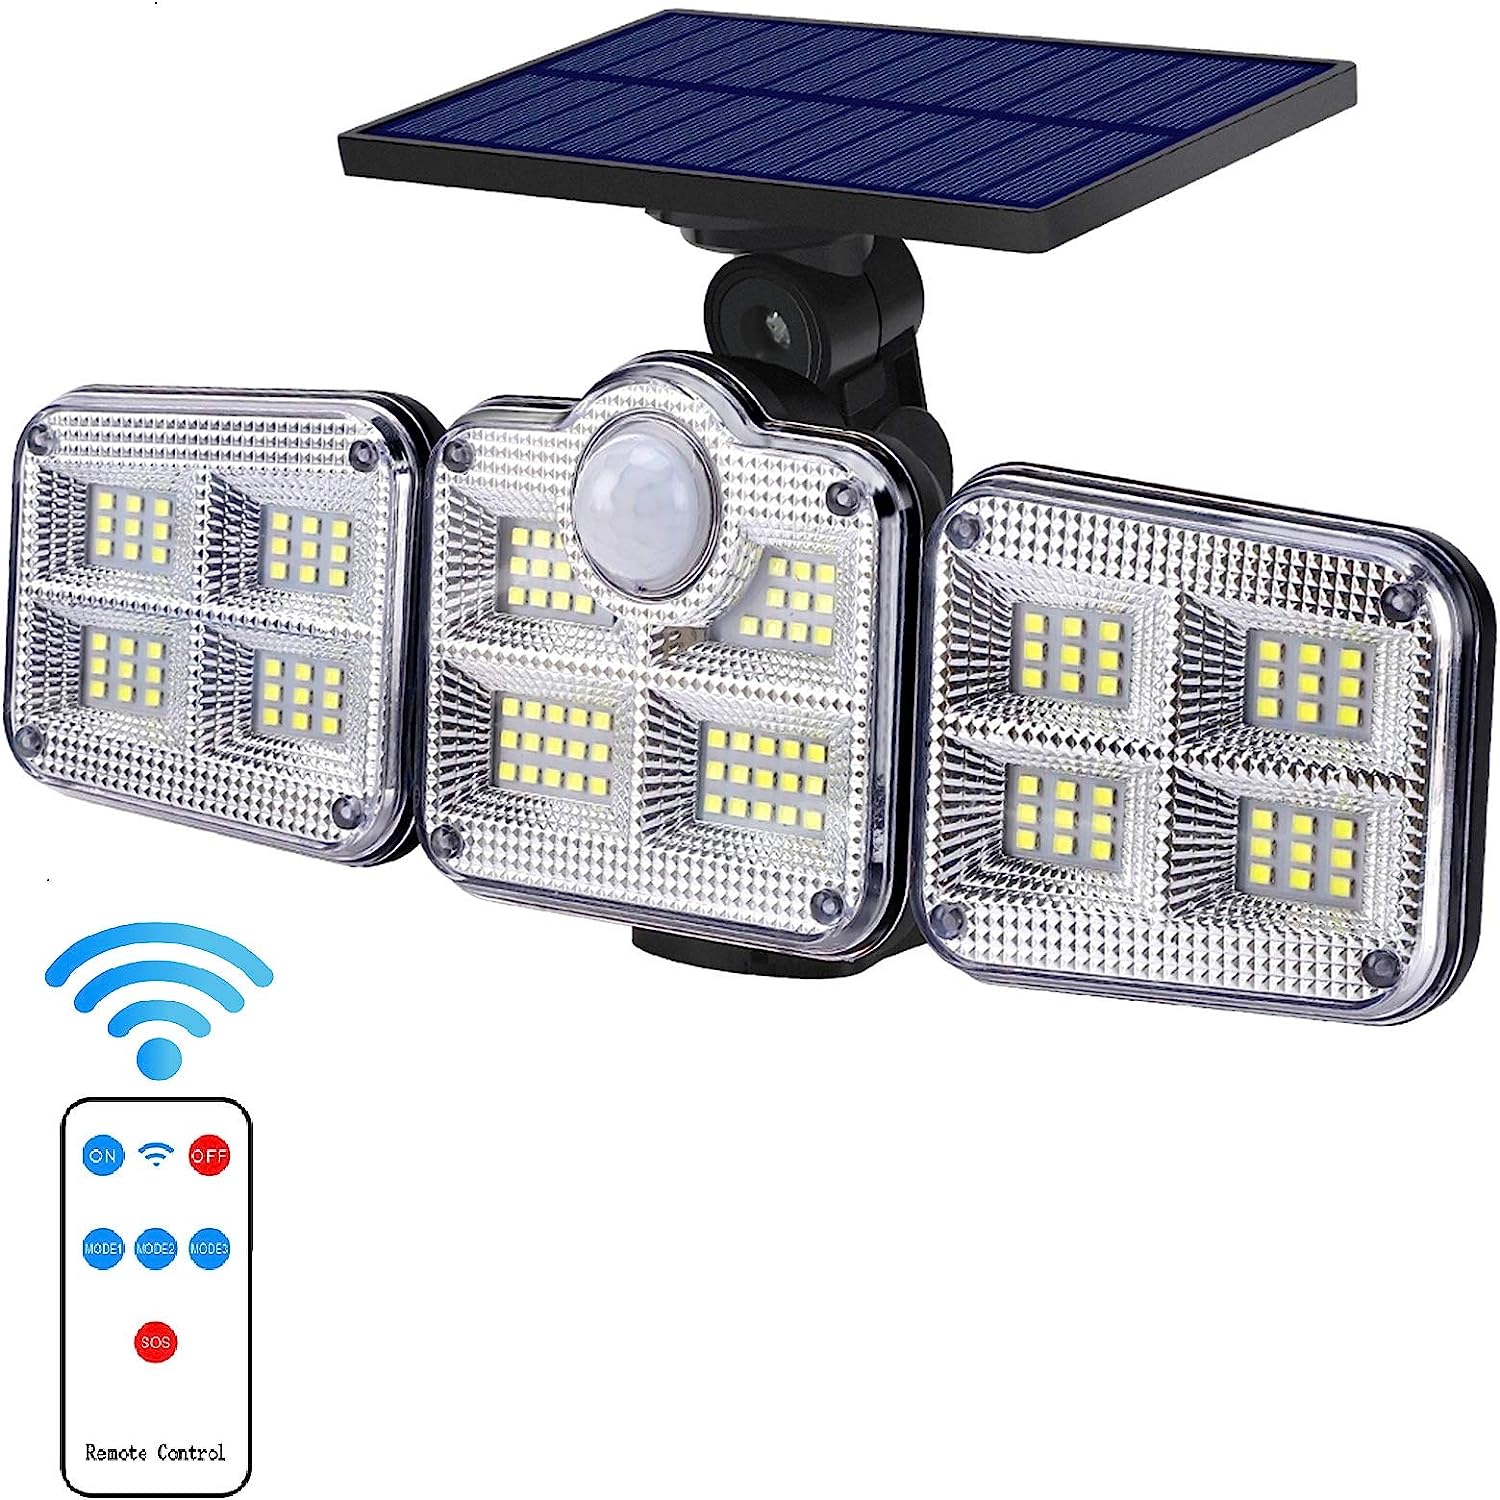 Solar Motion Sensor Lights with Remote Control 3 Adjustable Heads Security LED Flood Light with 270° Wide Angle Illumination IP65 Waterproof